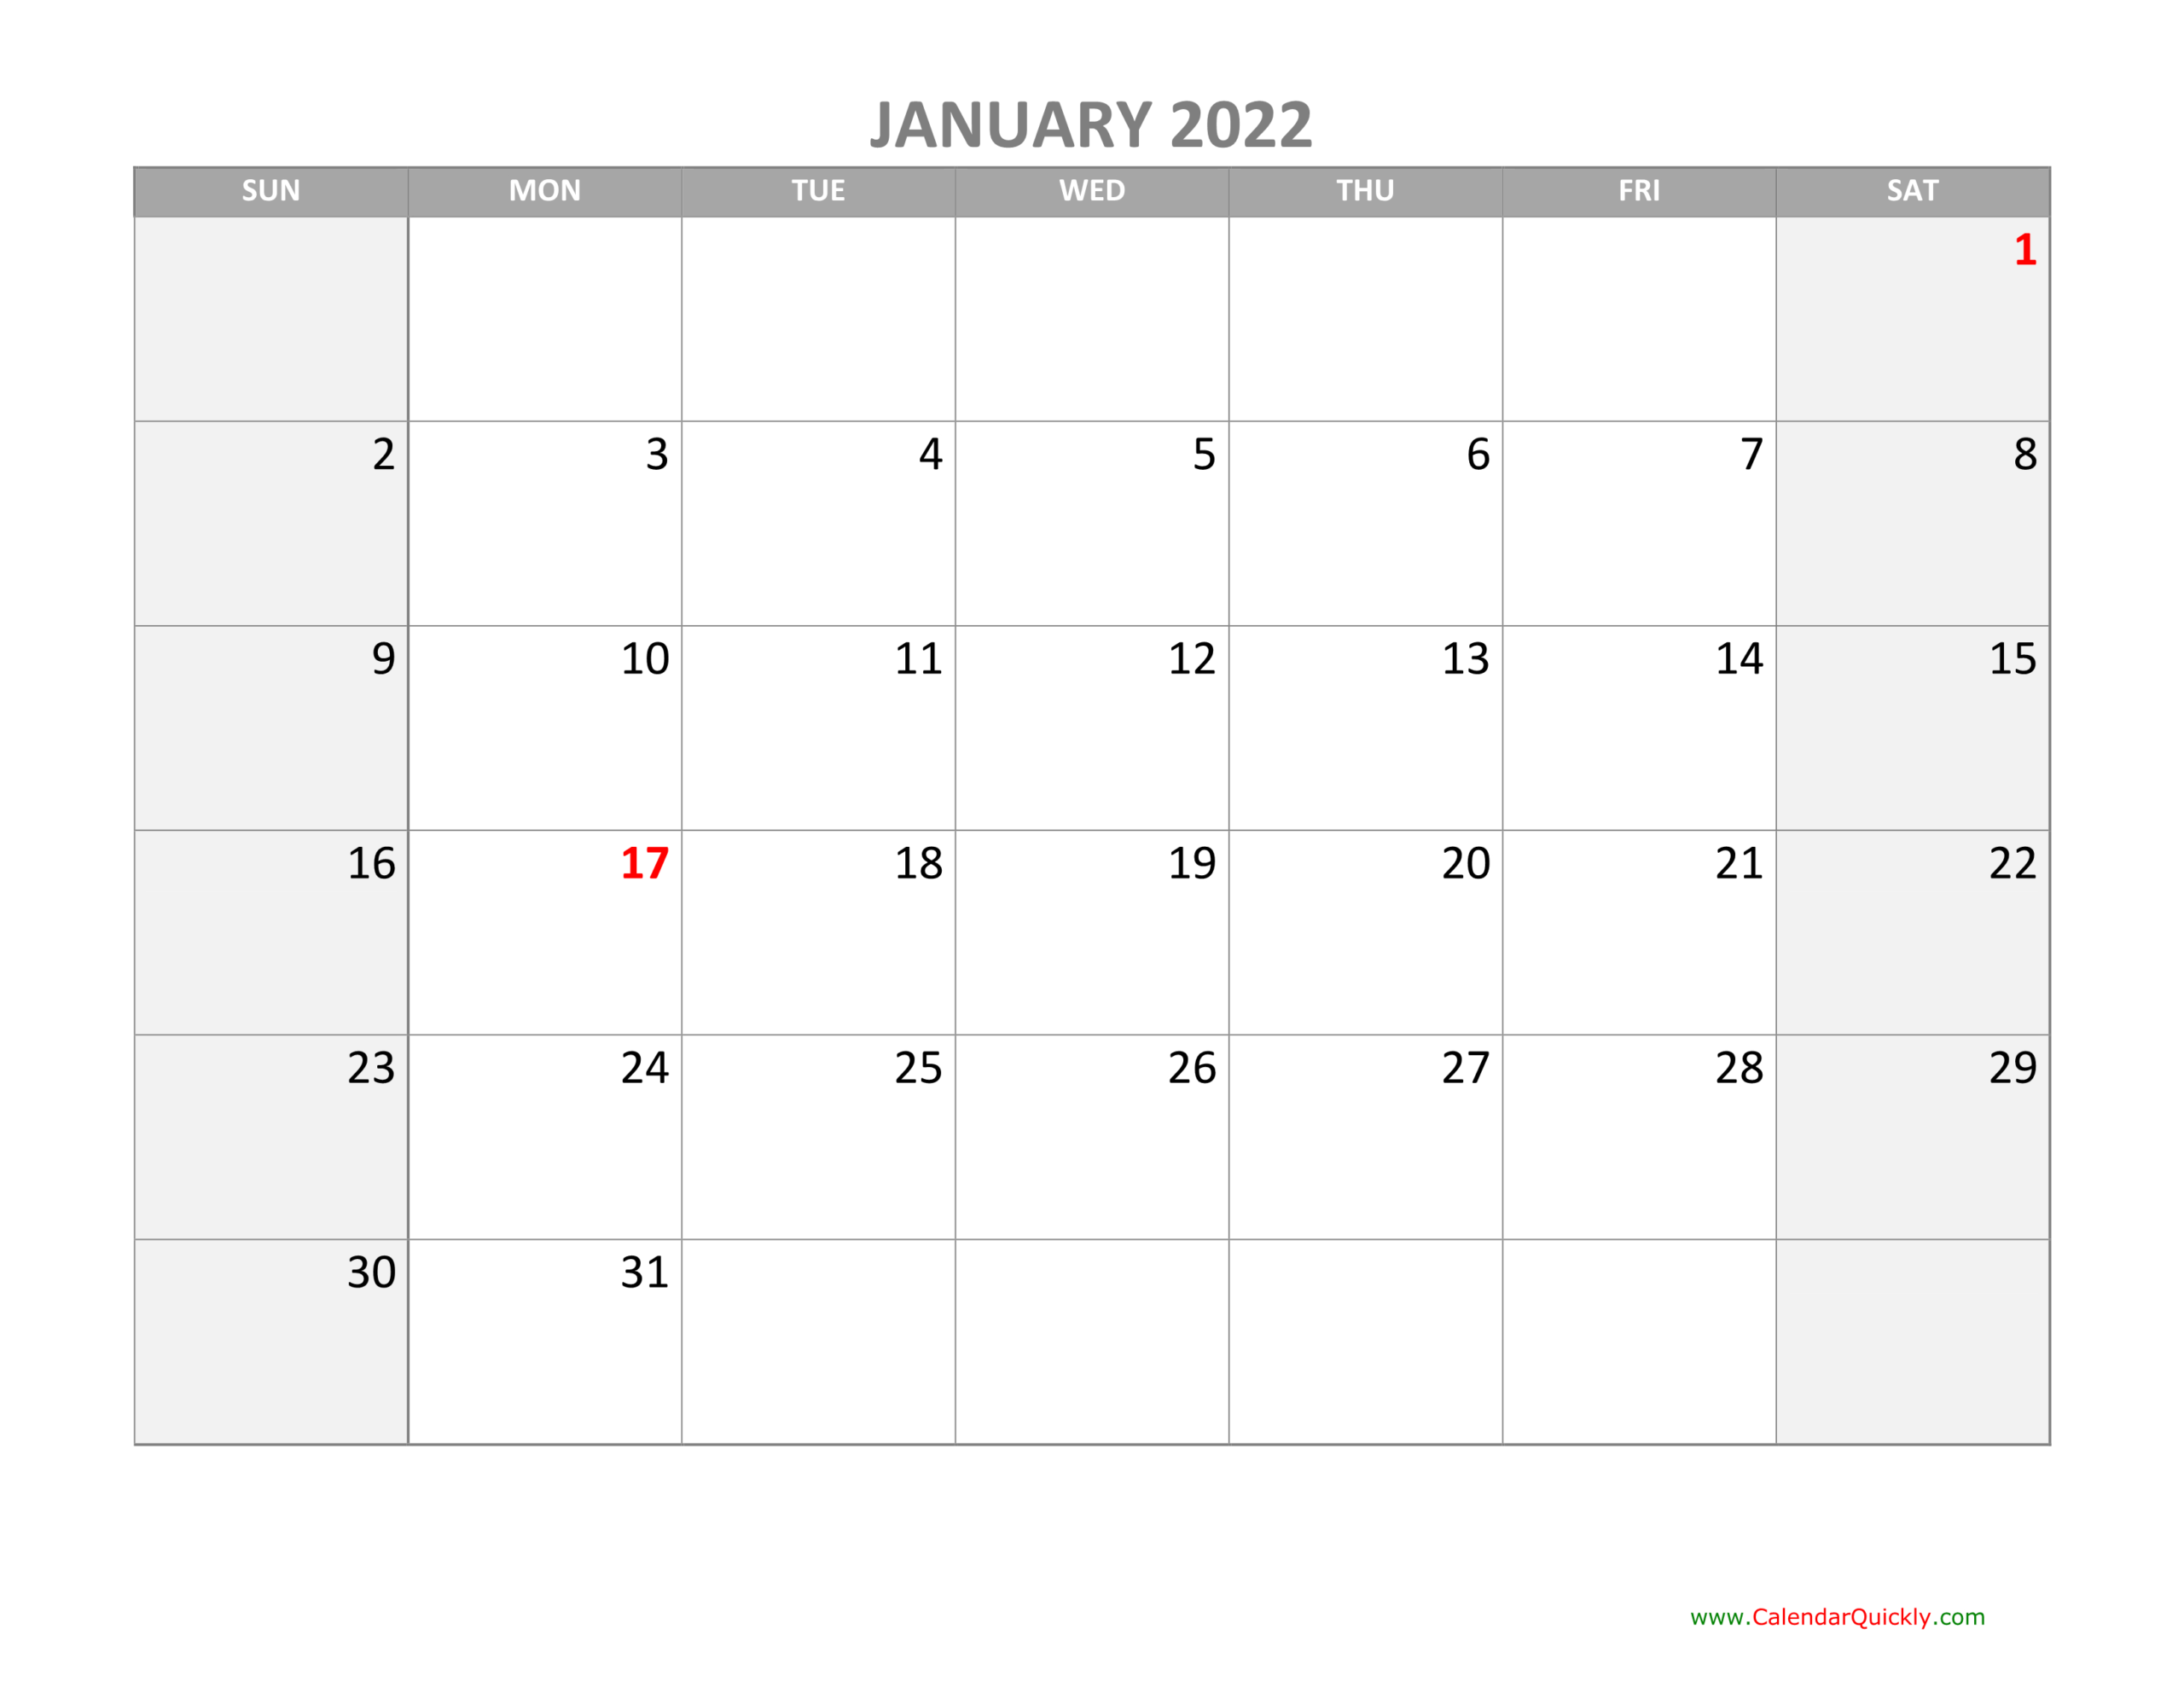 Monthly Calendar 2022 With Holidays | Calendar Quickly